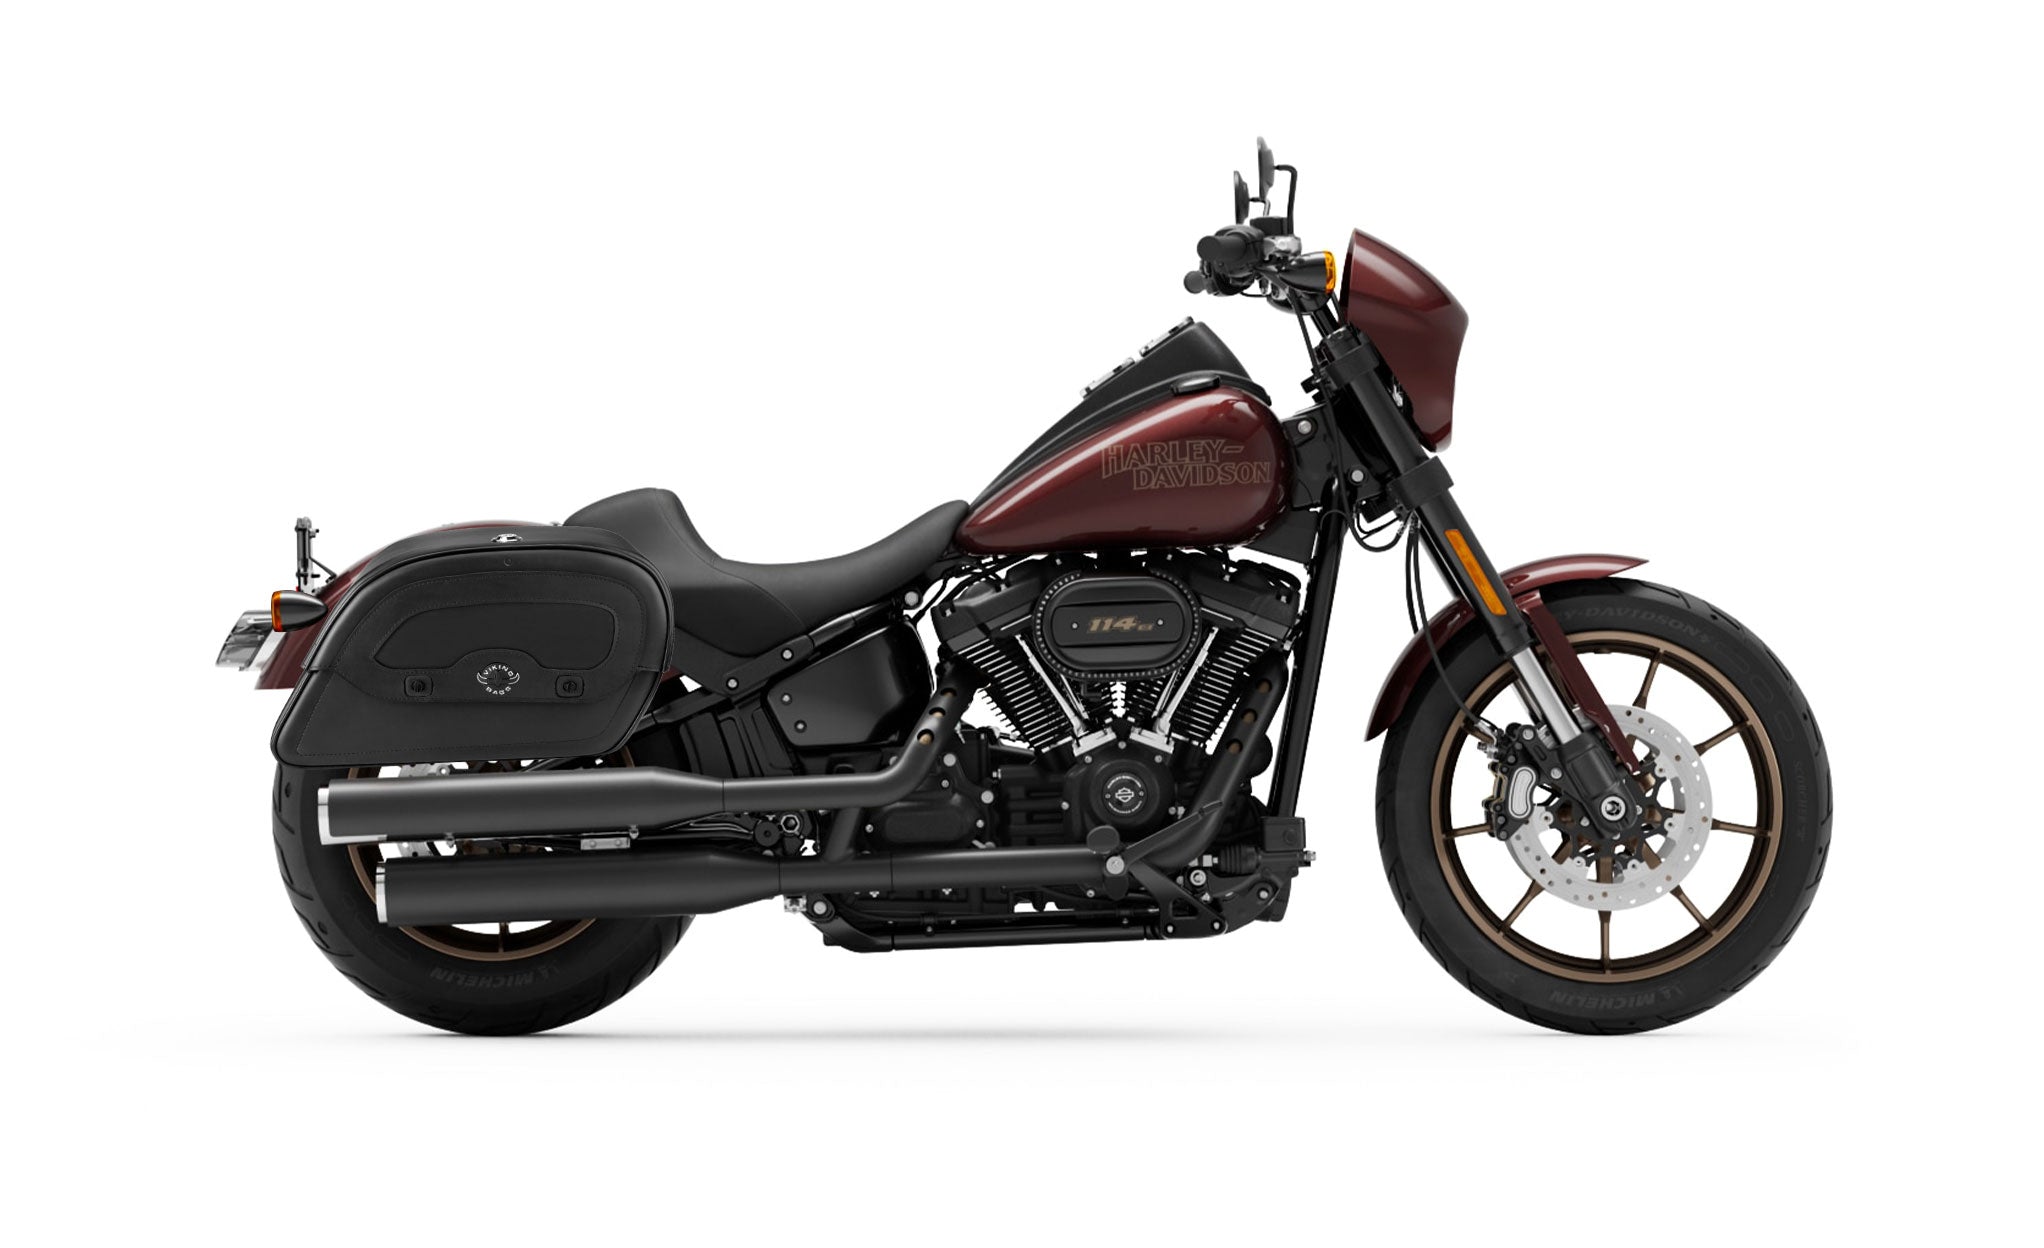 Viking Warrior Large Leather Motorcycle Saddlebags For Harley Softail Low Rider S Fxlrs on Bike Photo @expand